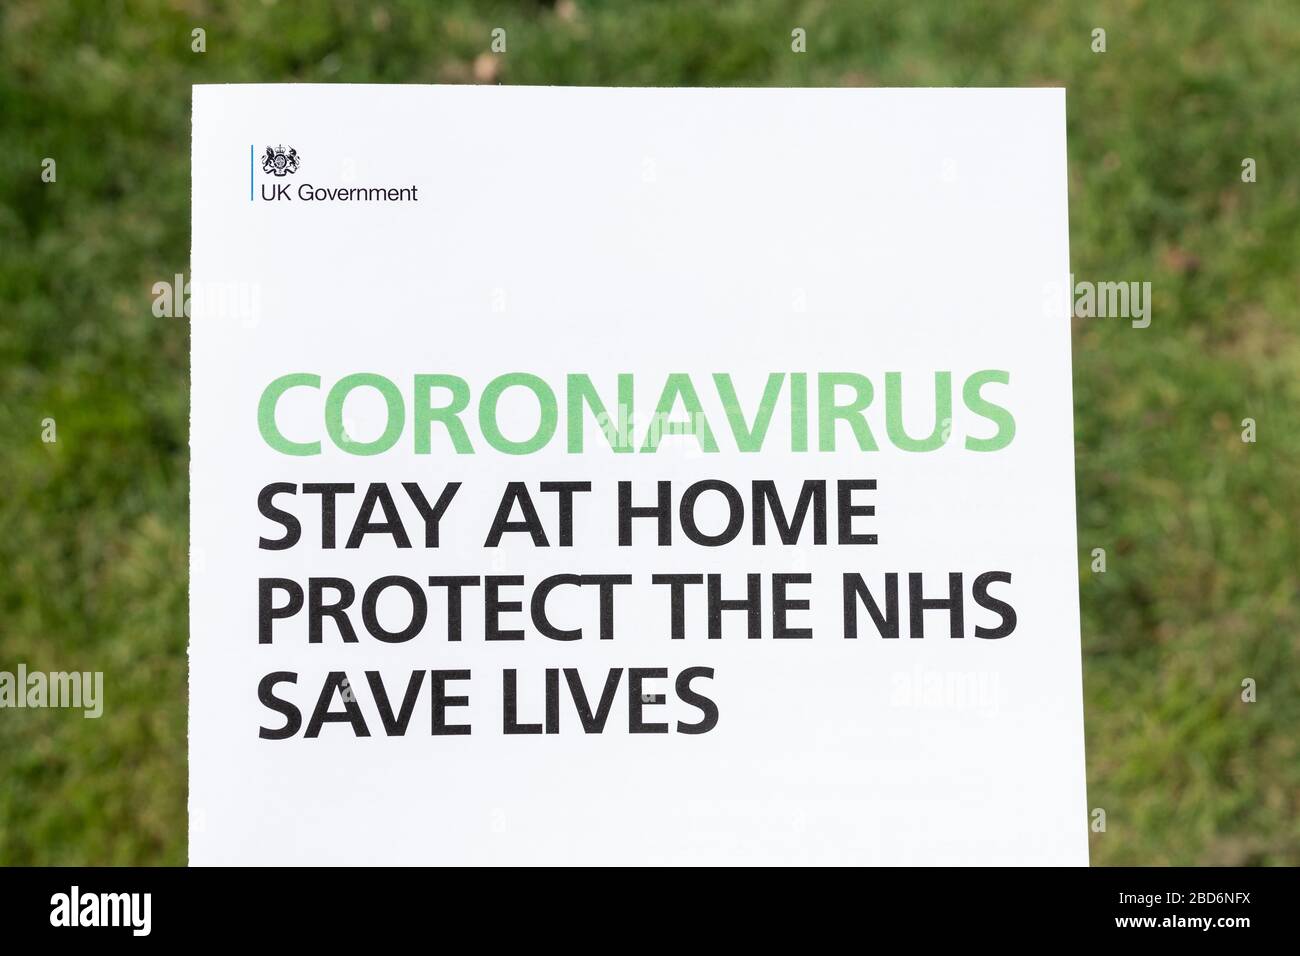 Coronavirus Stay at home Protect the NHS Save Lives - Information leaflet from the UK Government about the coronavirus Covid-19 pandemic, April 2020 Stock Photo